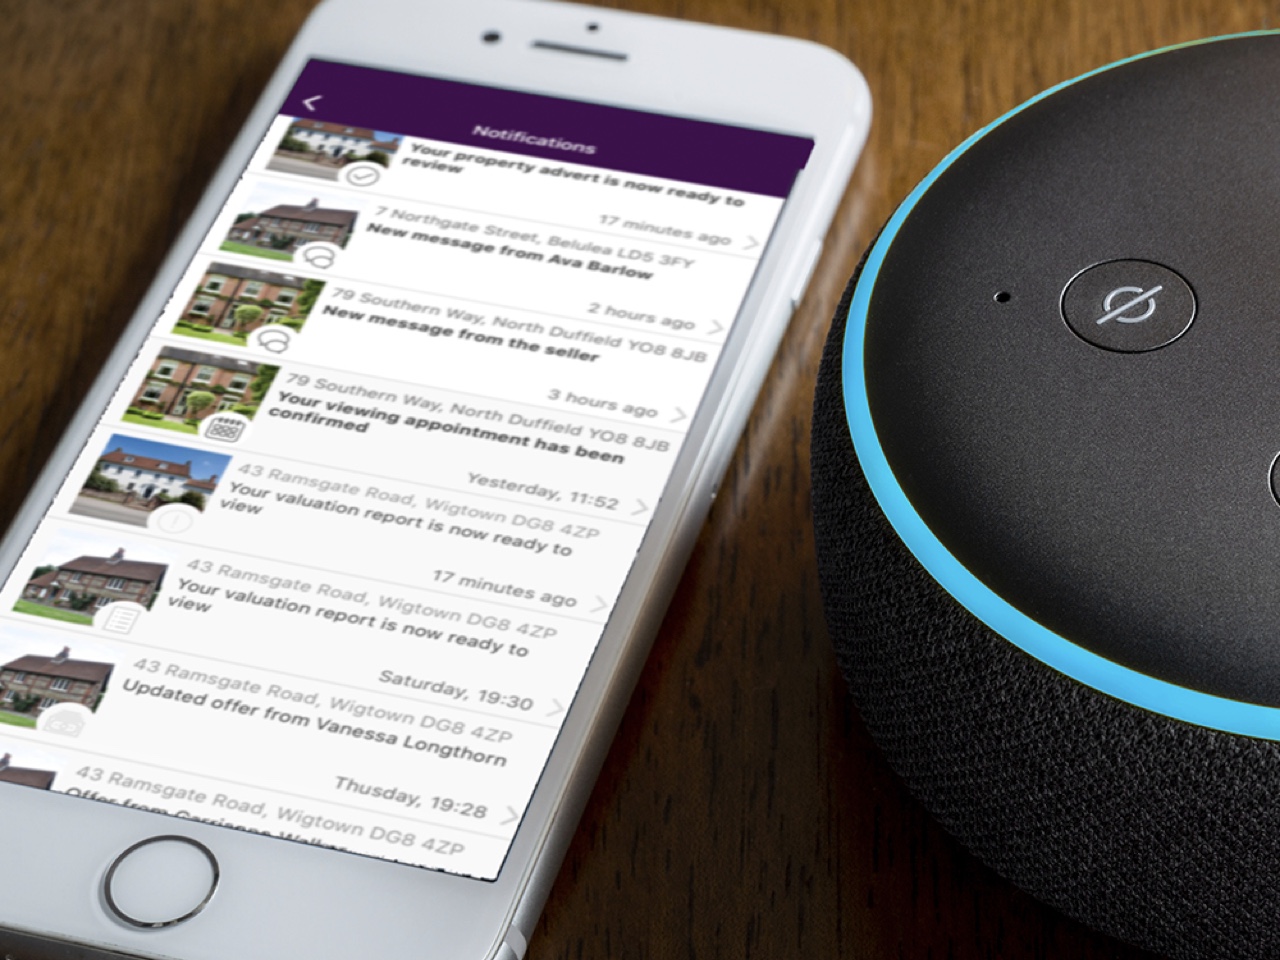 Purplebricks teams up with Amazon Alexa to provide customers with instant updates